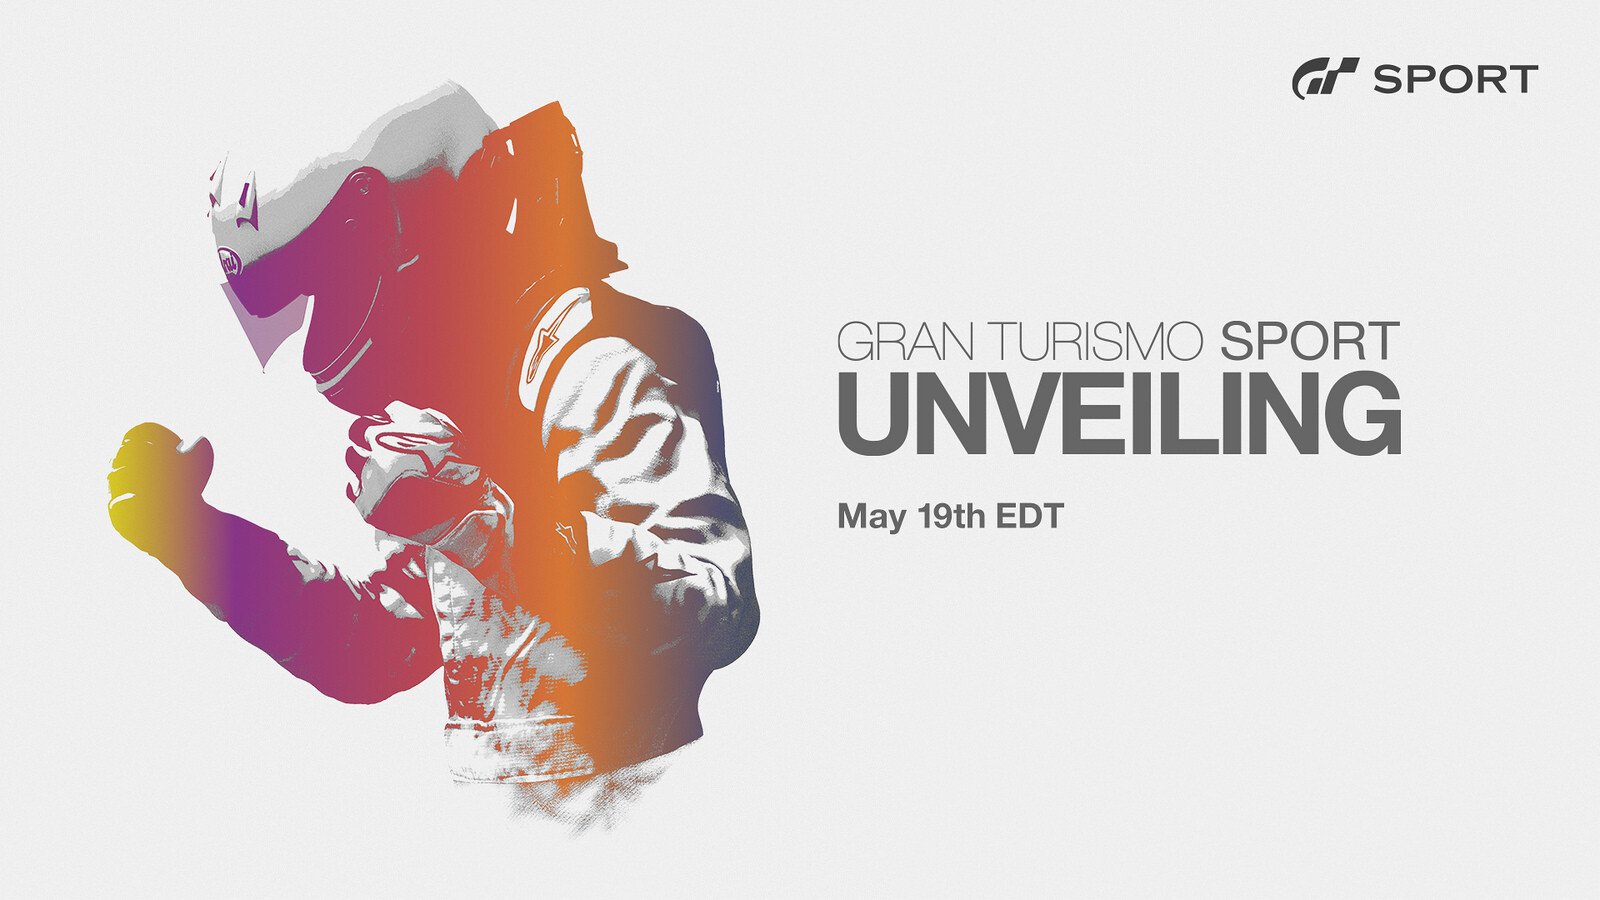 New Gran Turismo Sport Footage Coming Soon